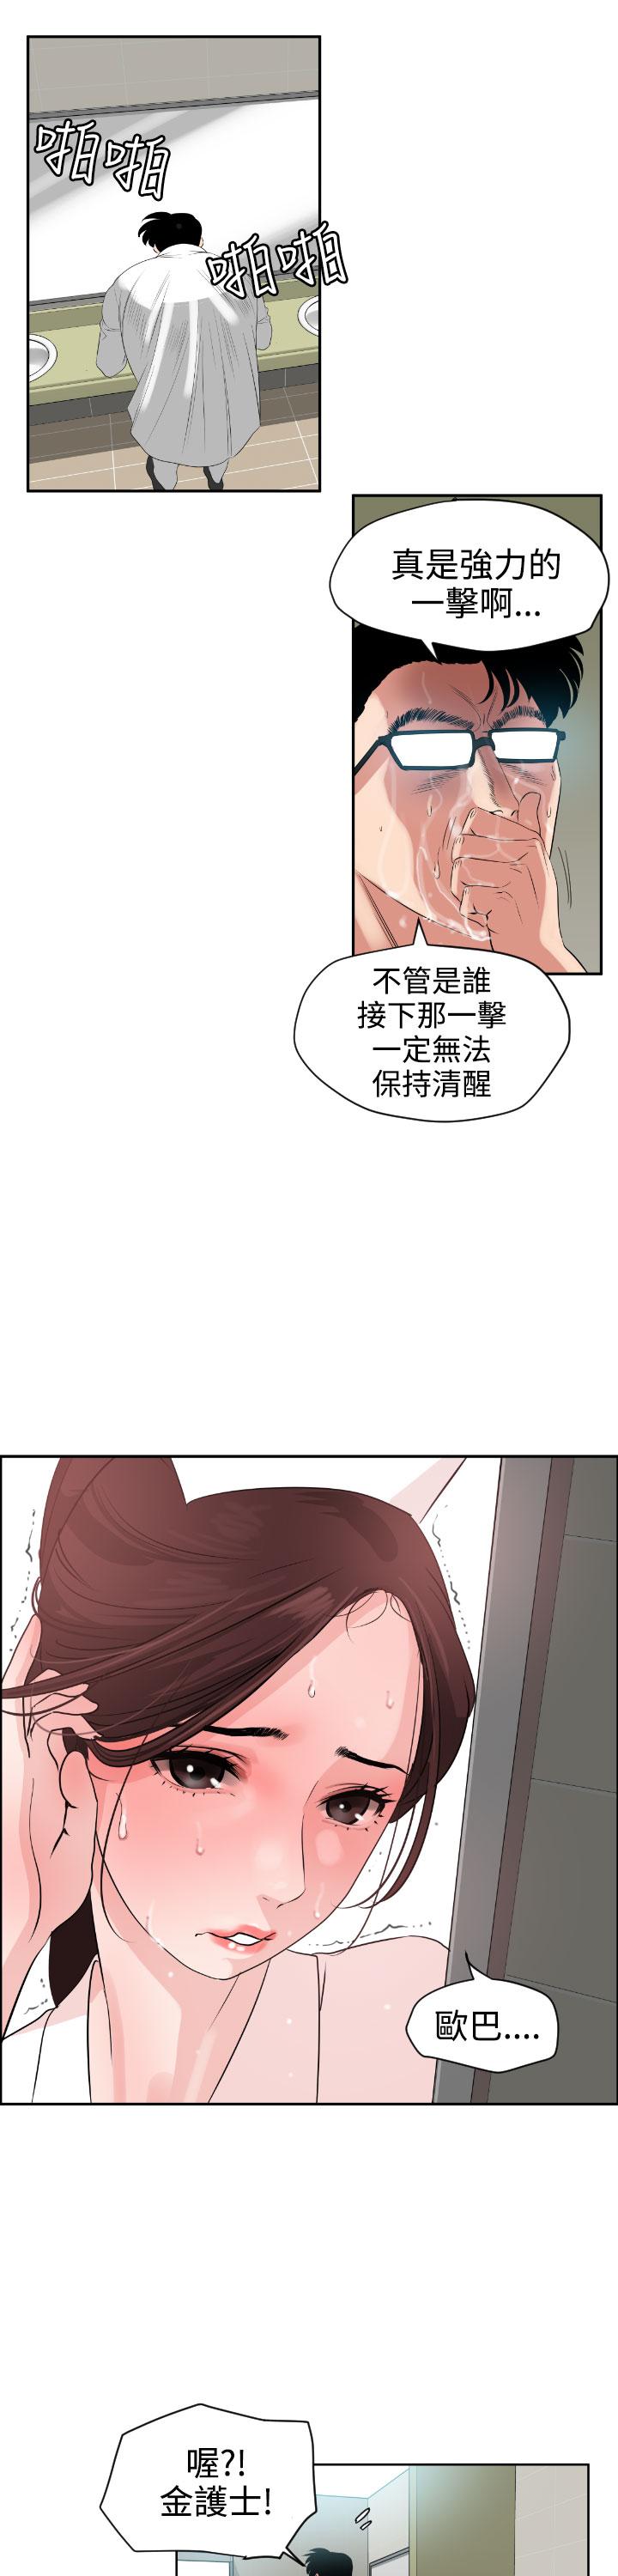 Desire King (慾求王) Ch.1-16 (chinese) 174